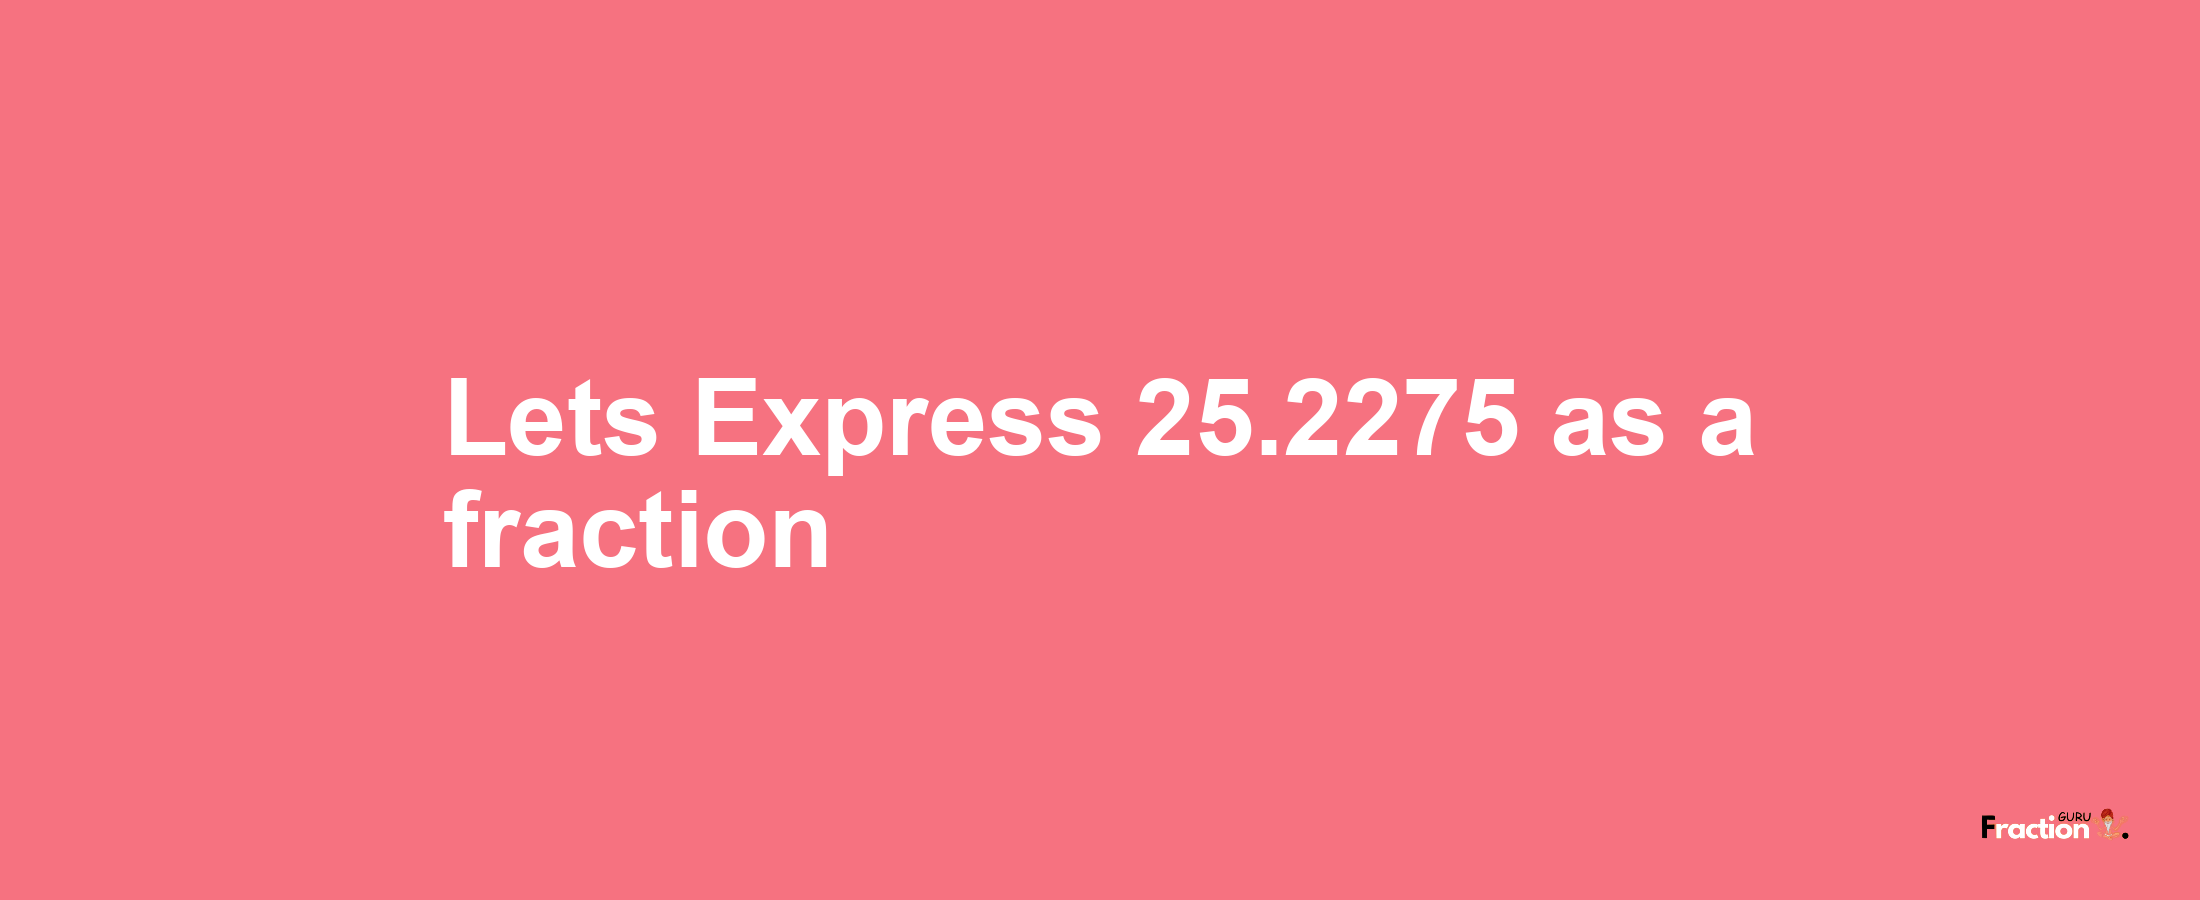 Lets Express 25.2275 as afraction